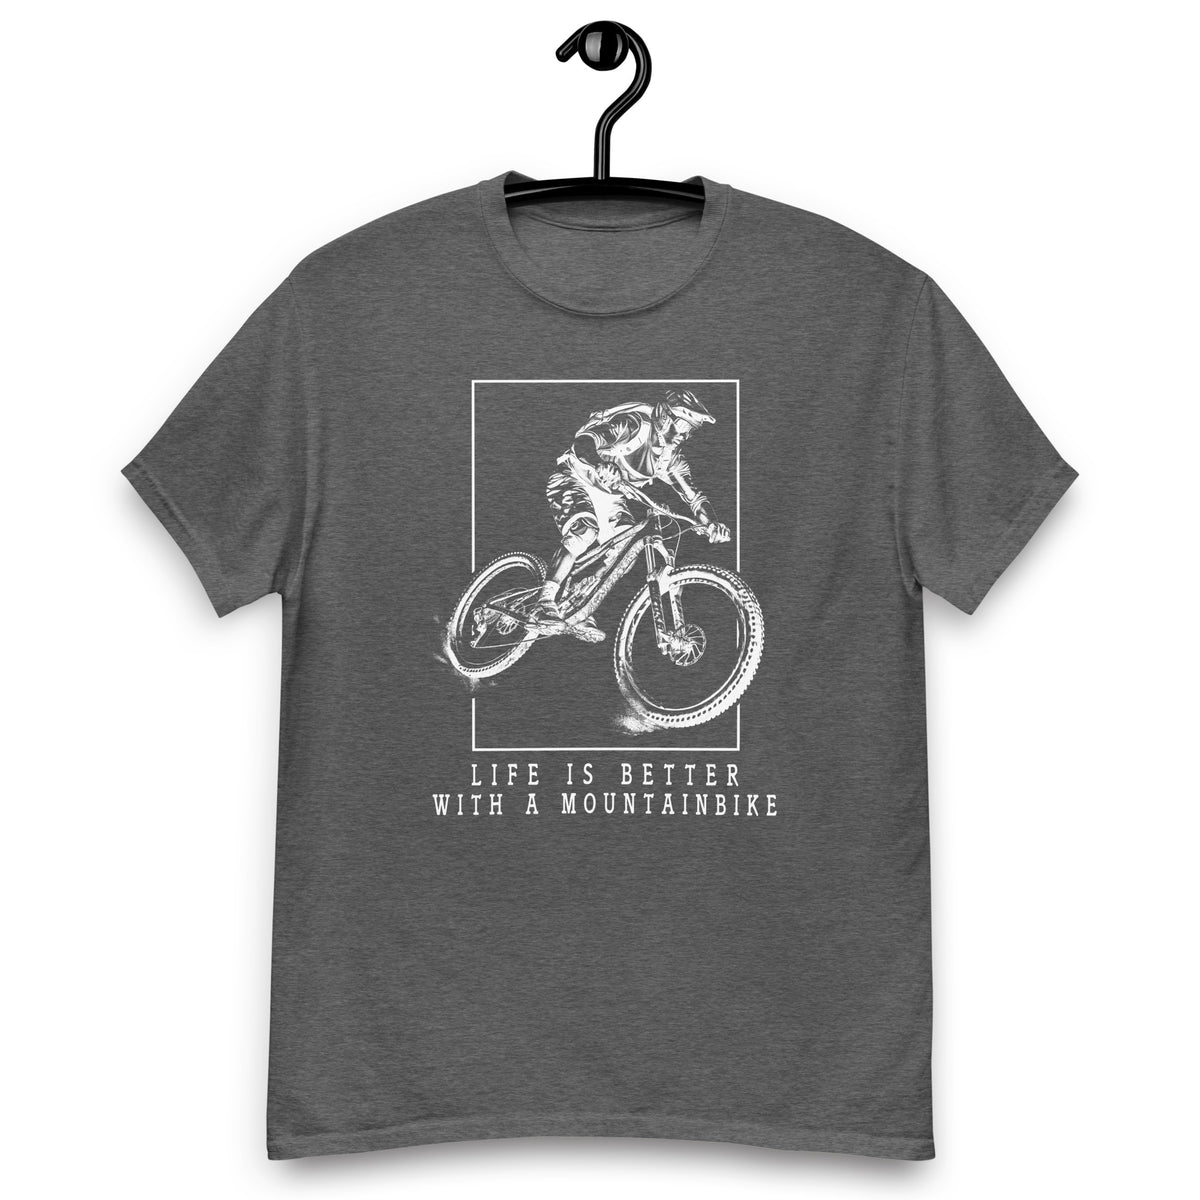 Fahrrad Shirts " Life is better with a Moutainbike "